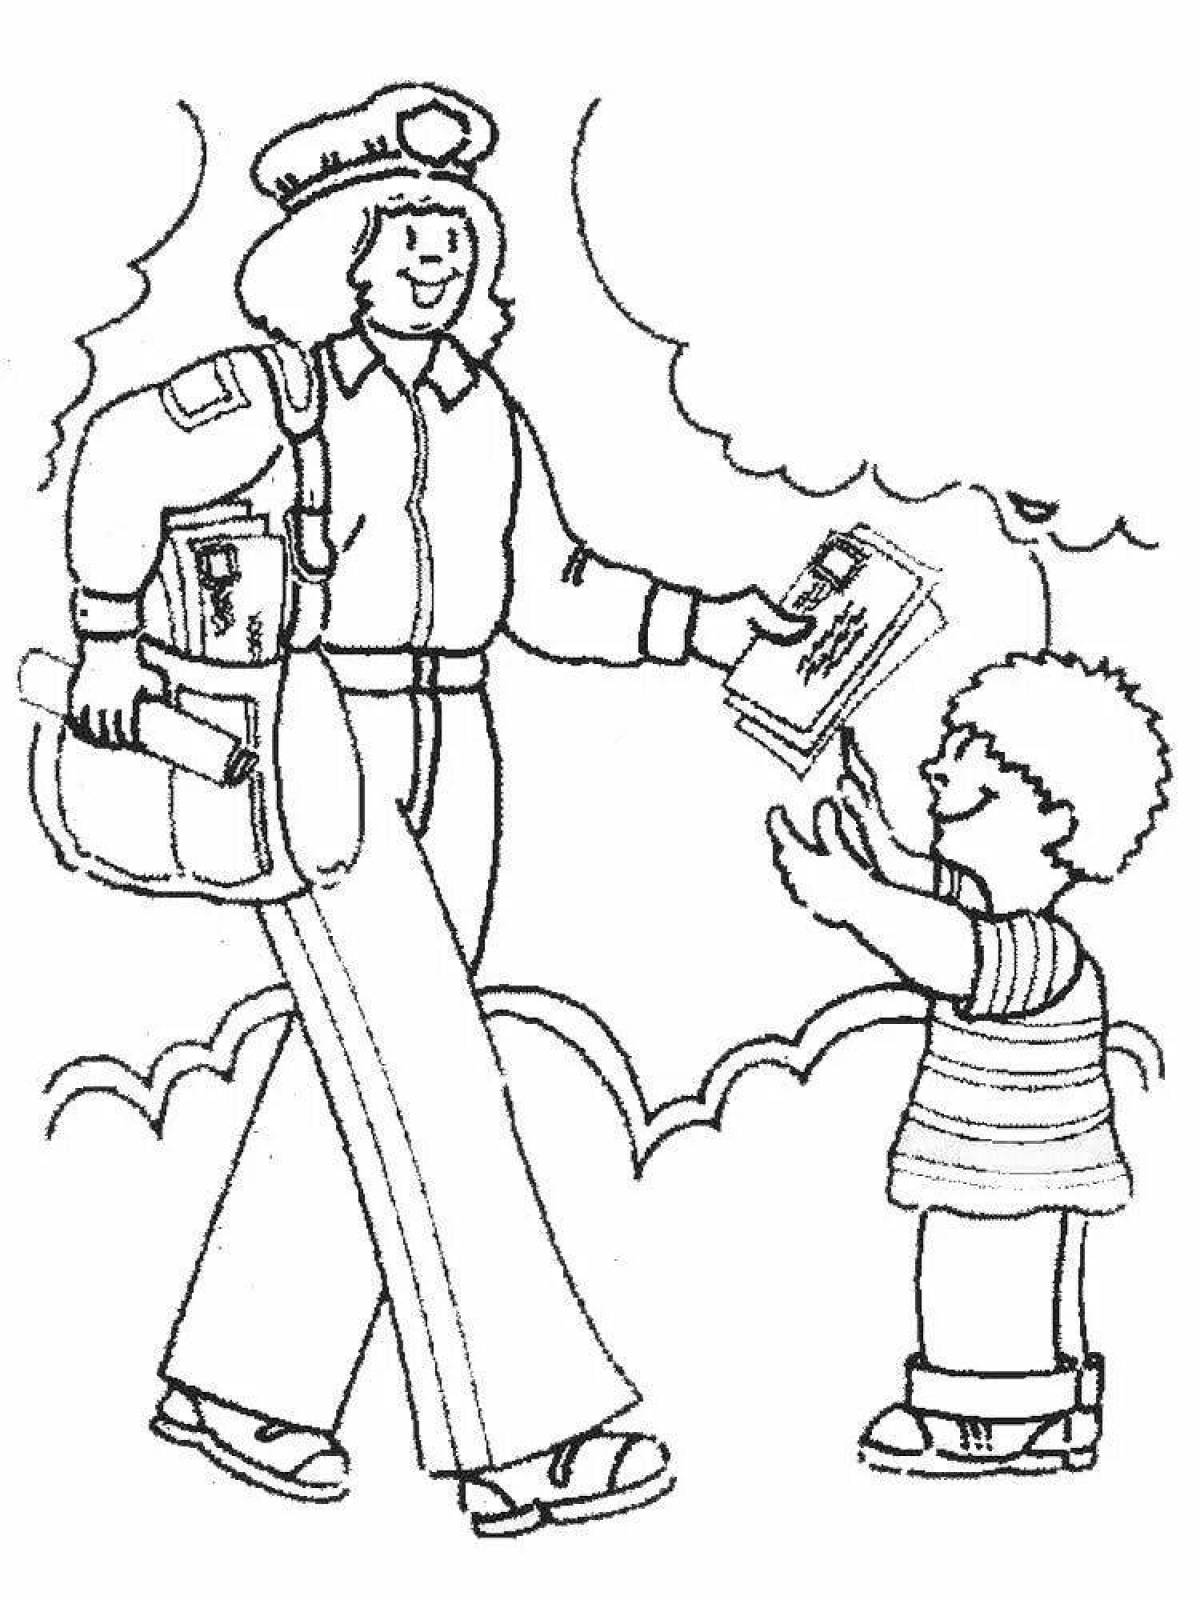 Living architect coloring page